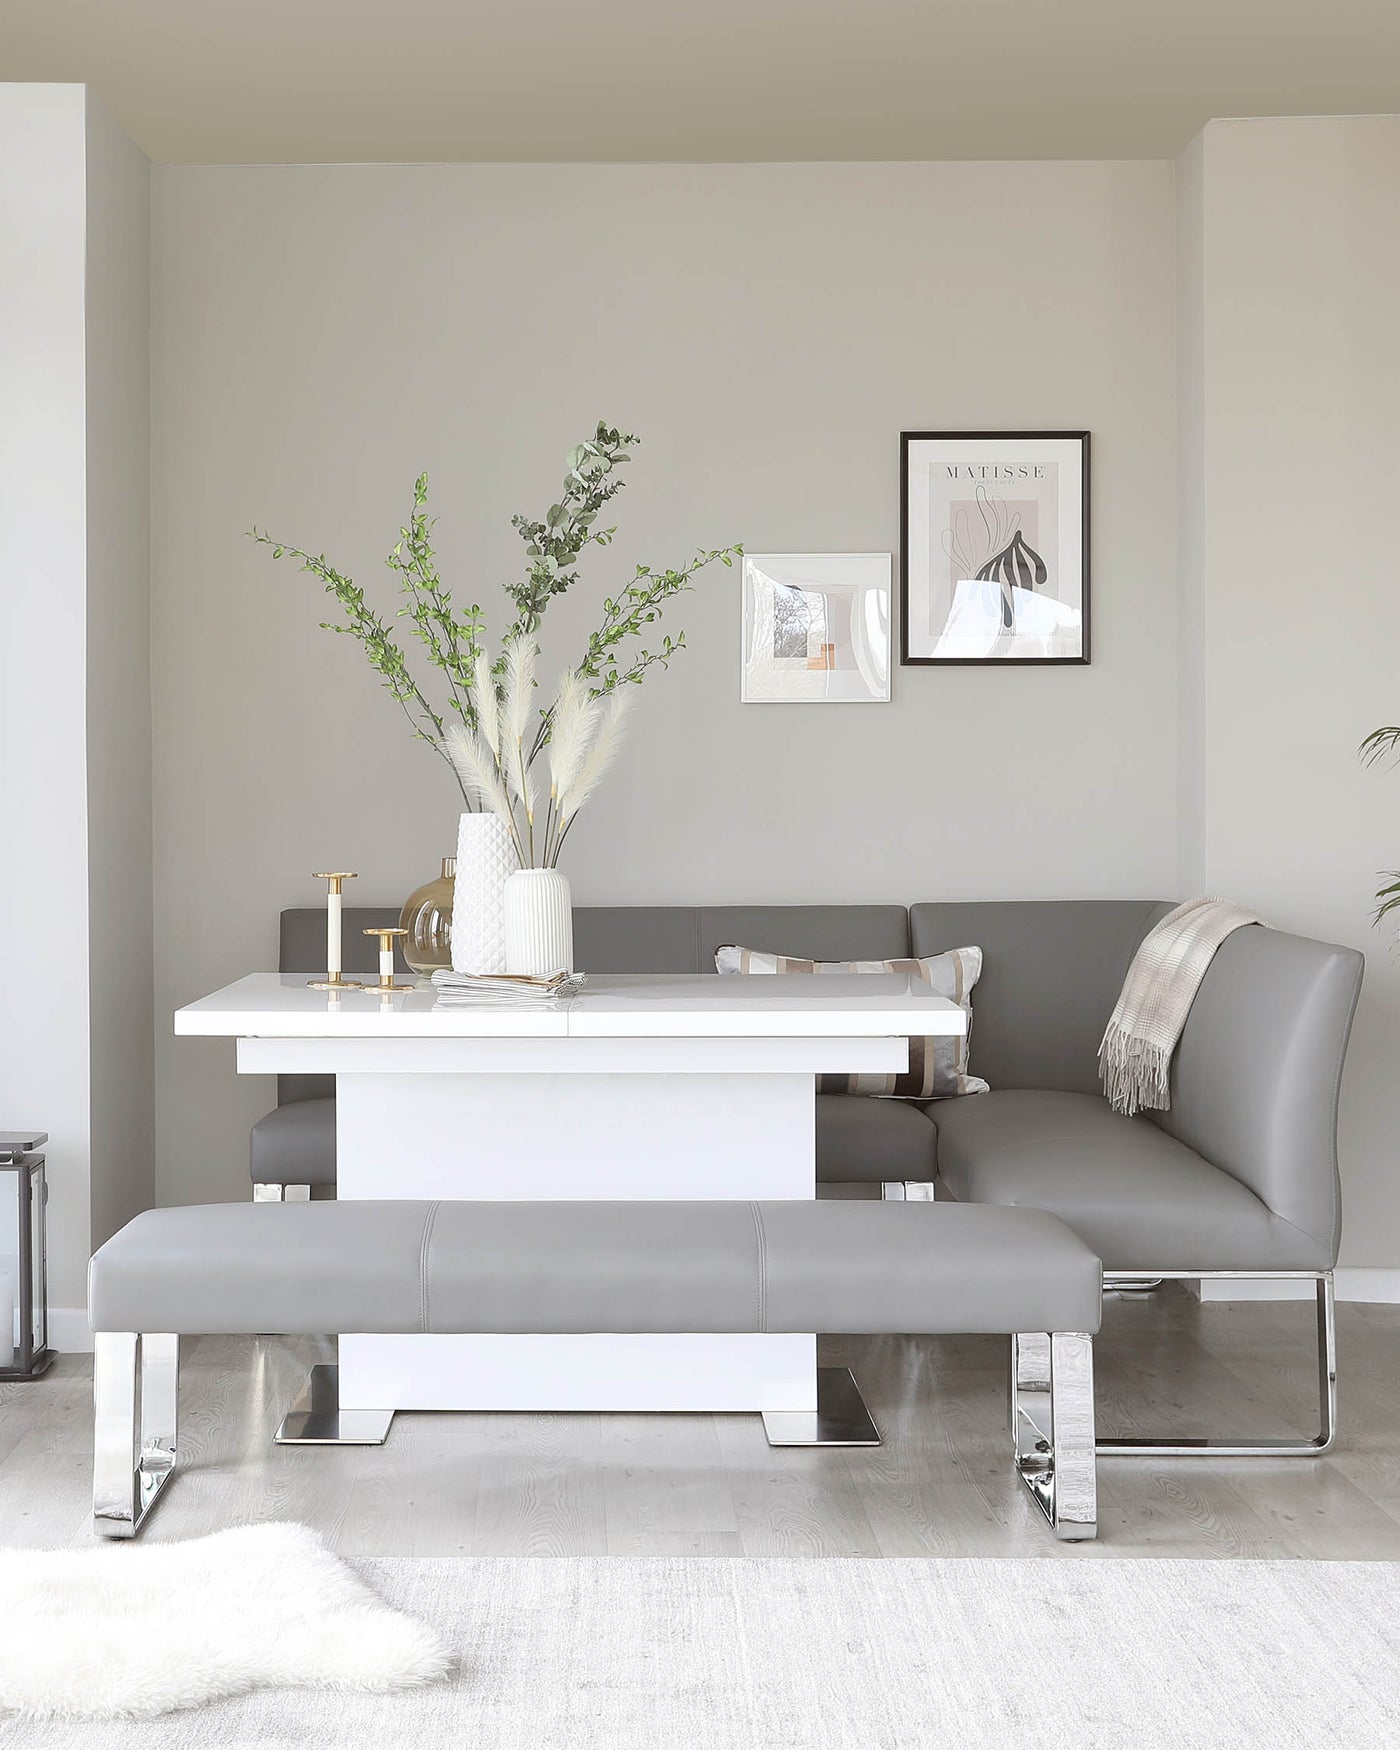 Modern minimalist dining room furniture set featuring a sleek white rectangular table with a broad base, paired with an elegant grey upholstered bench and complementing L-shaped corner bench, both accented with chrome-finished legs. A plush white area rug partially underlays the ensemble.